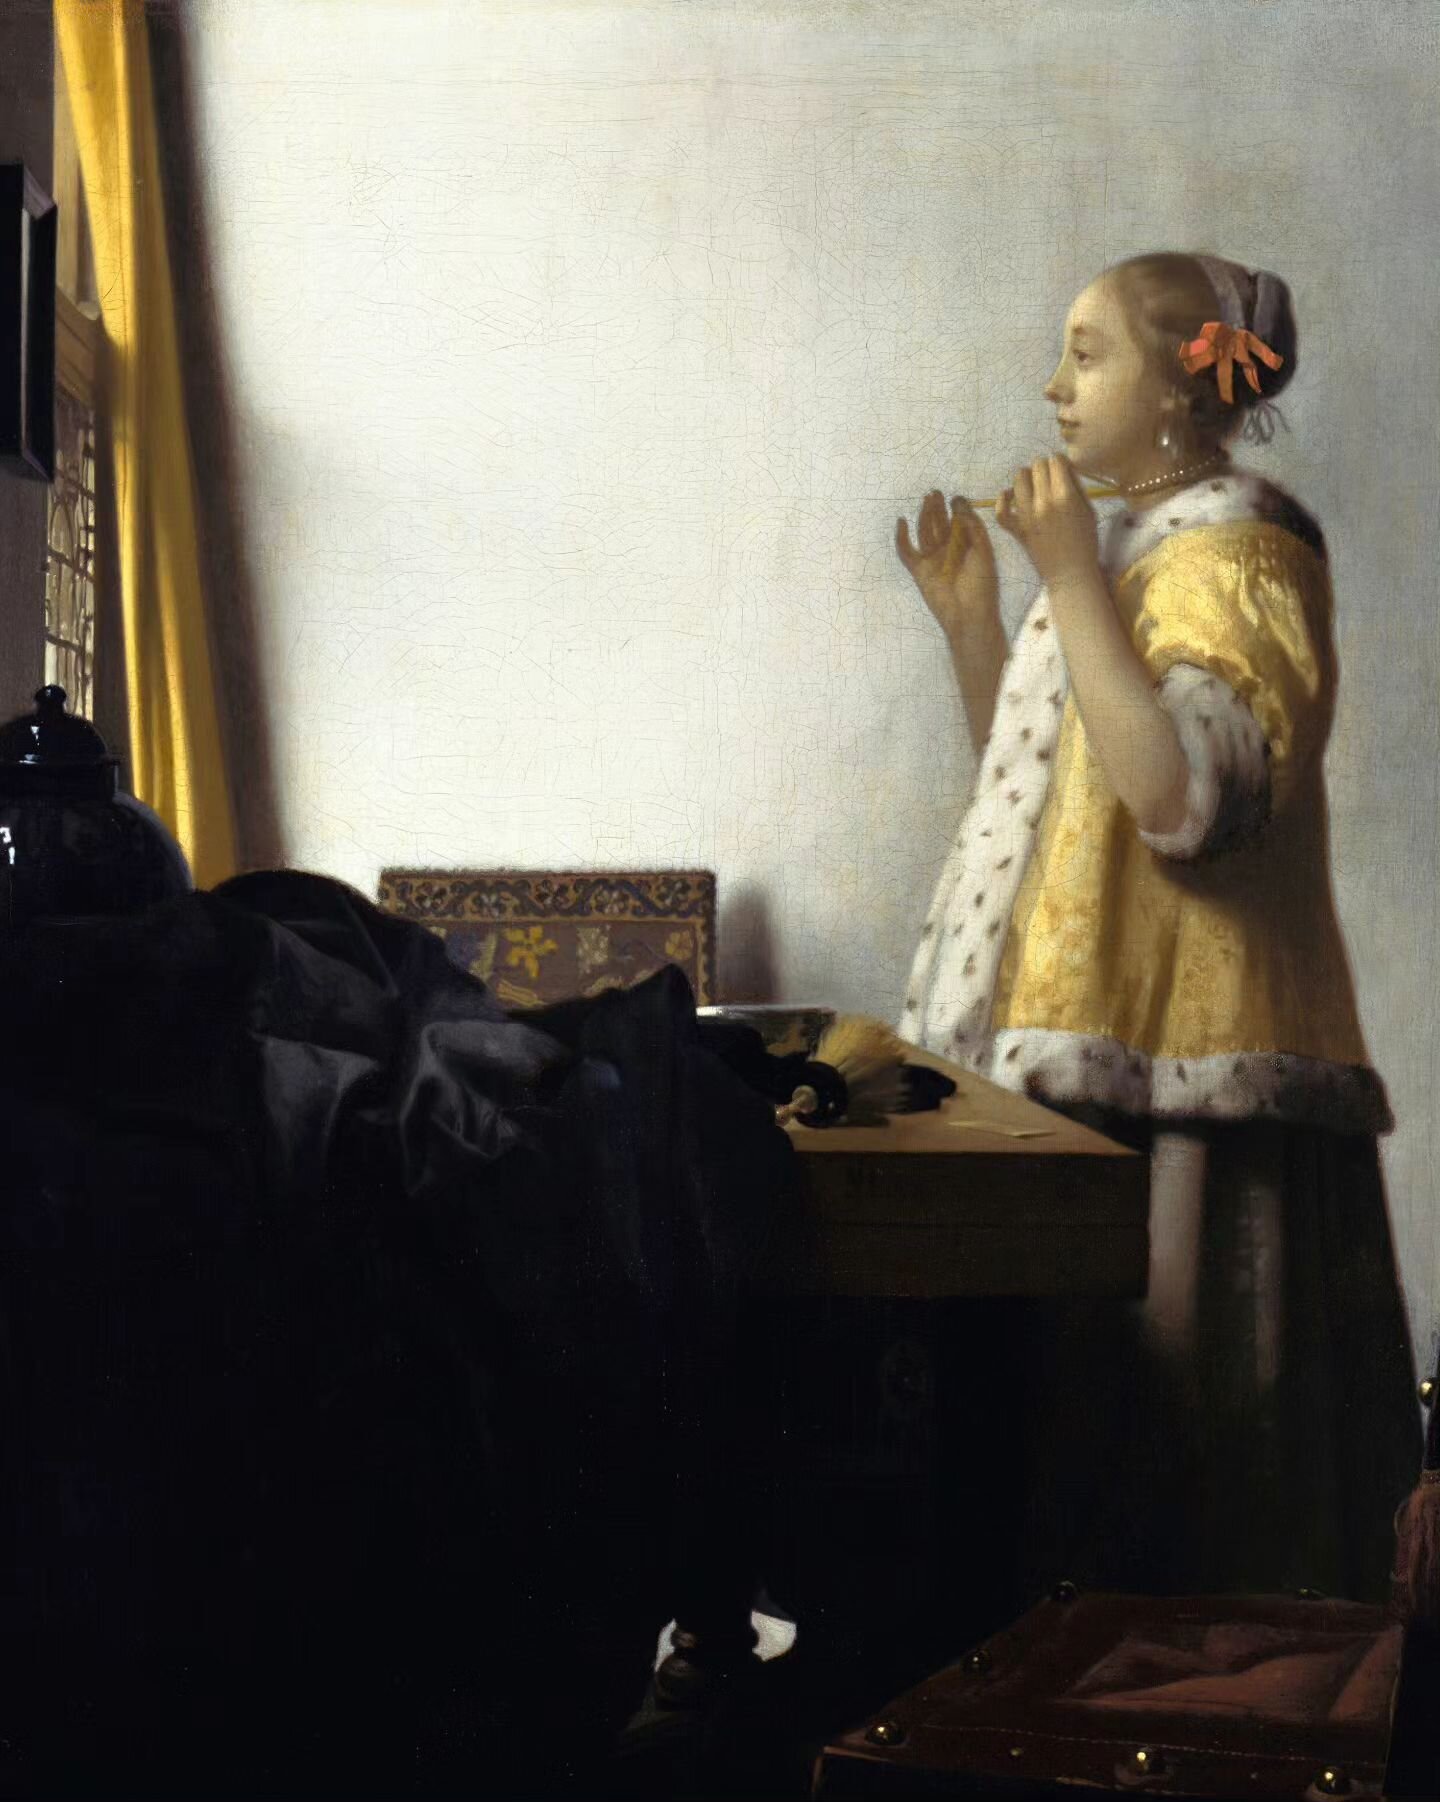 Johannes Vermeer was a perfectionist. He painted slowly and with expensive pigments. He made only 34 paintings, most of them quiet, eerily realistic domestic scenes. Vermeer was mildly successful in his day, but his death left his family impoverished